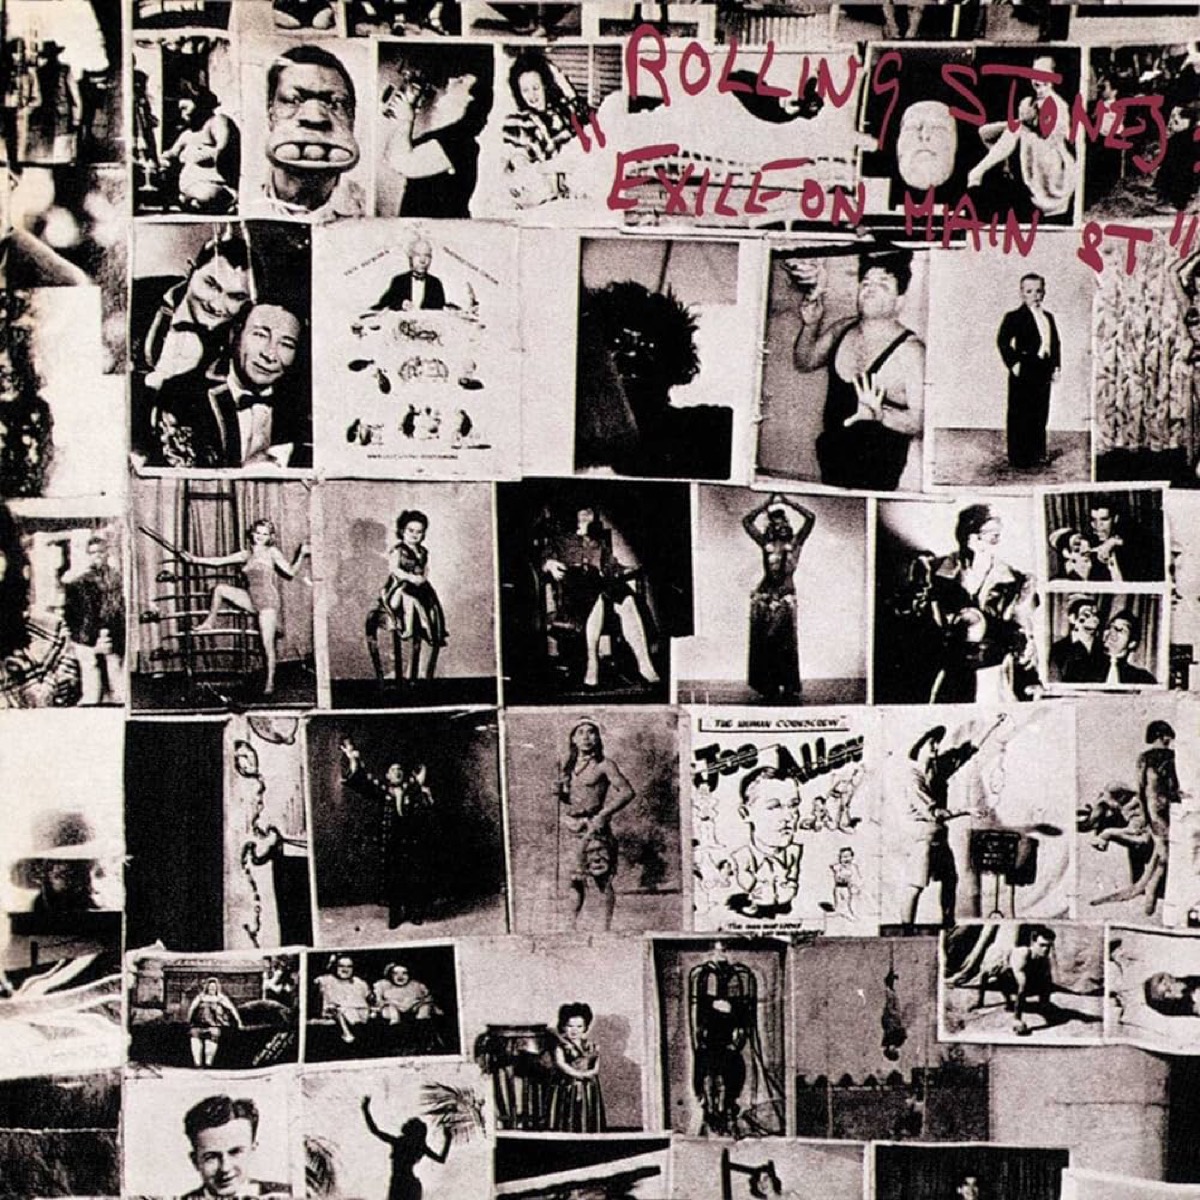 "Exile on Main St." by The Rolling Stones